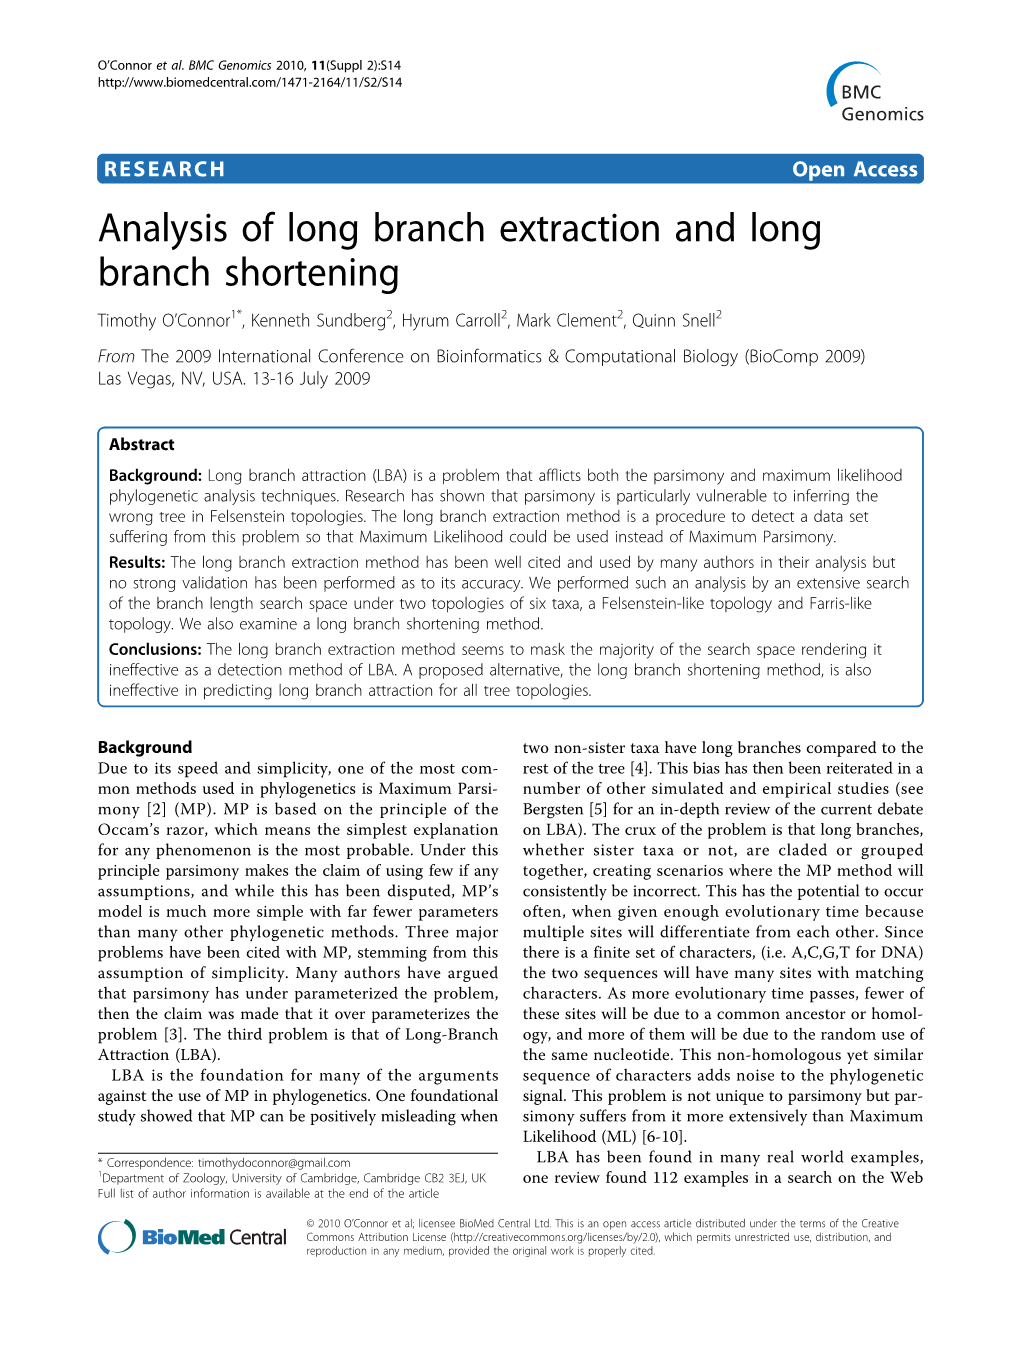 Analysis of Long Branch Extraction and Long Branch Shortening